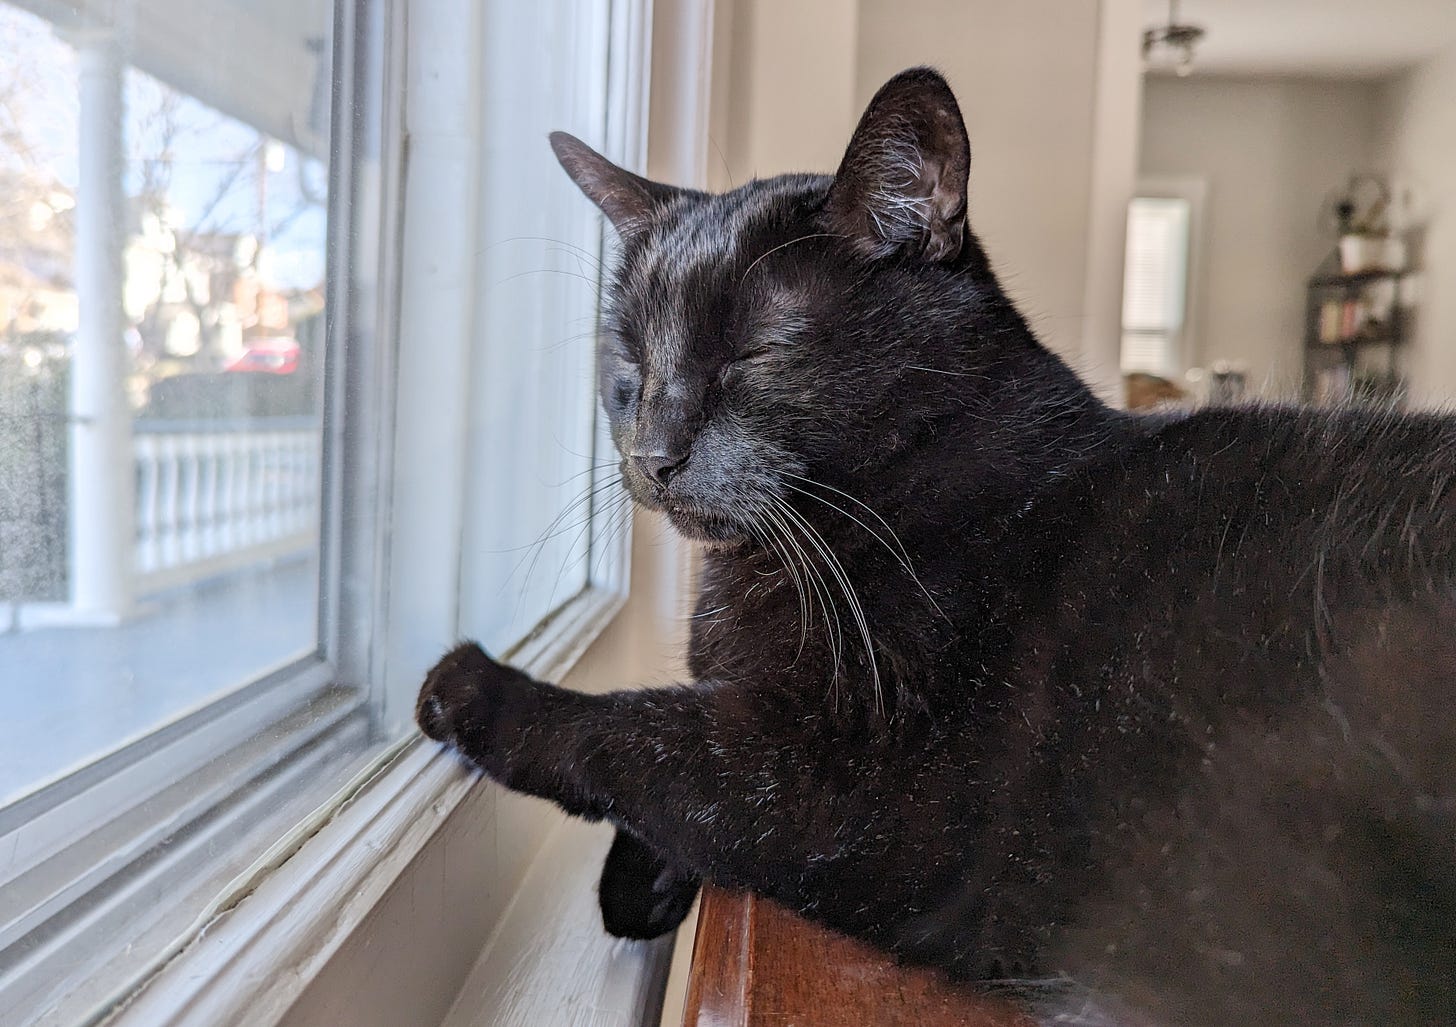 A black cat reclines by a window, one front paw on the sill. His eyes are closed.